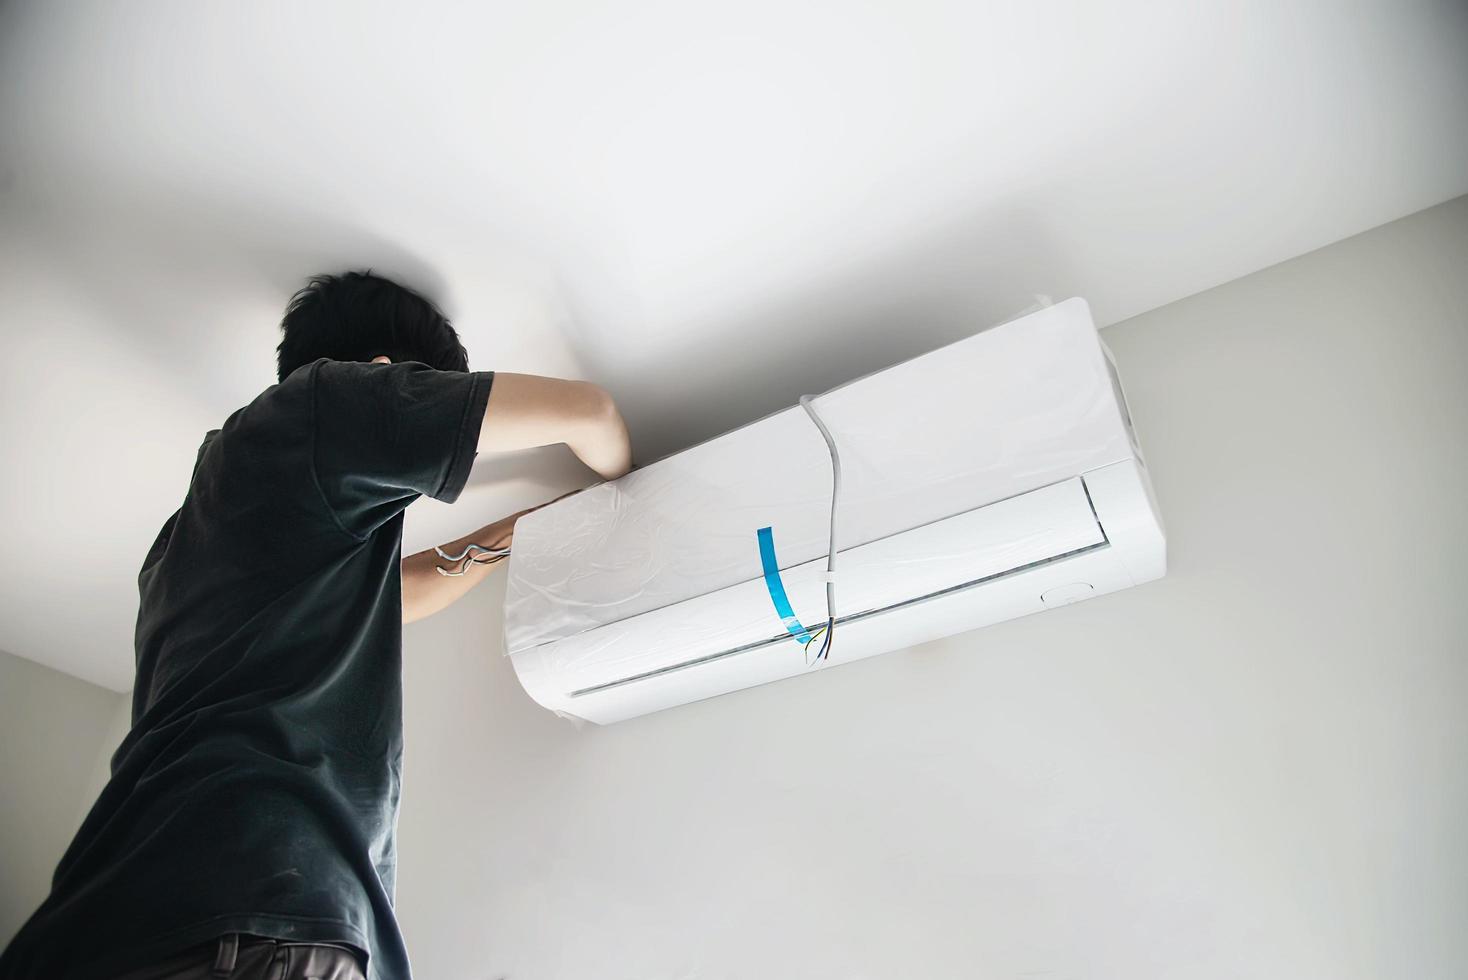 Technician is installing air conditioner during hot season photo